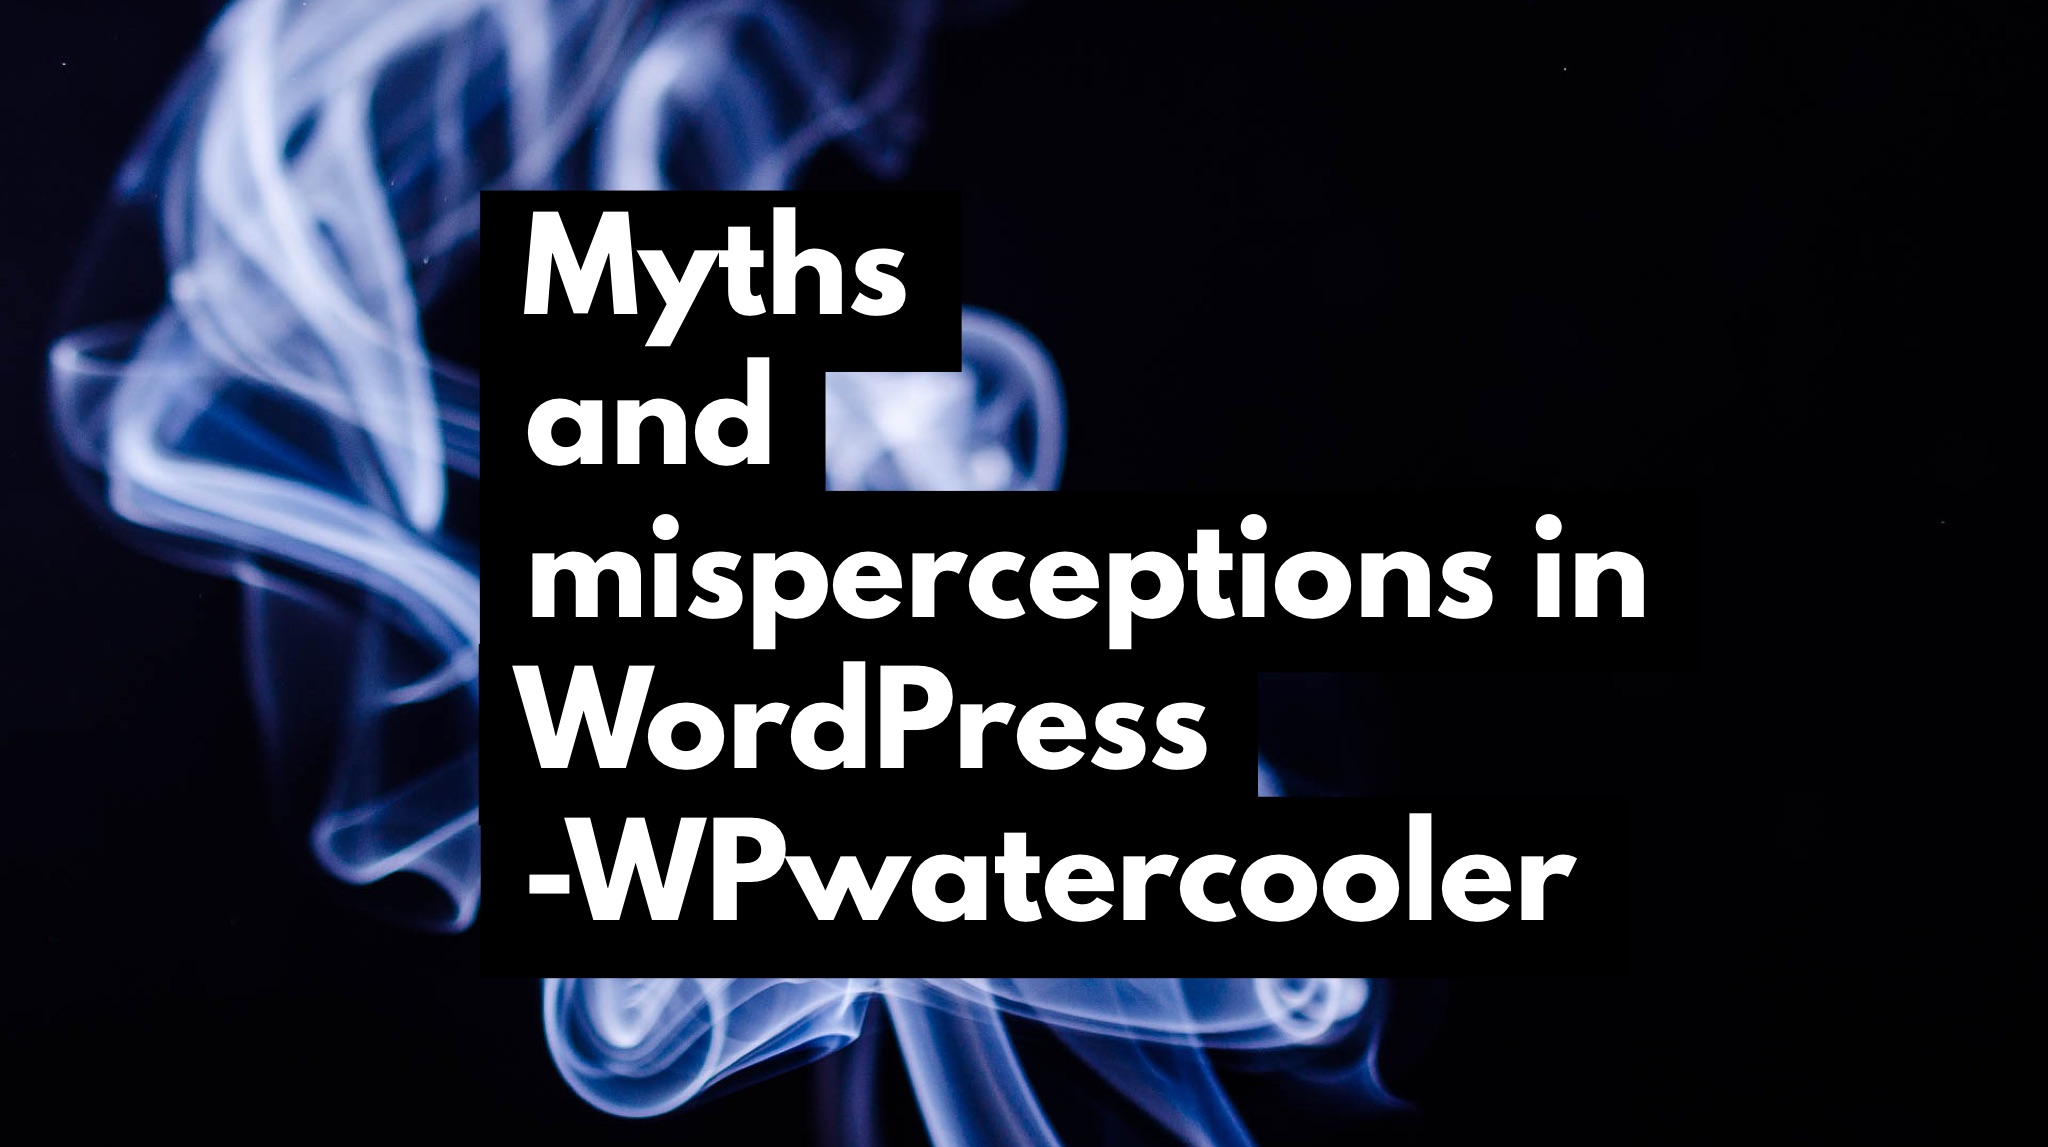 EP261 – Myths and misperceptions in WordPress